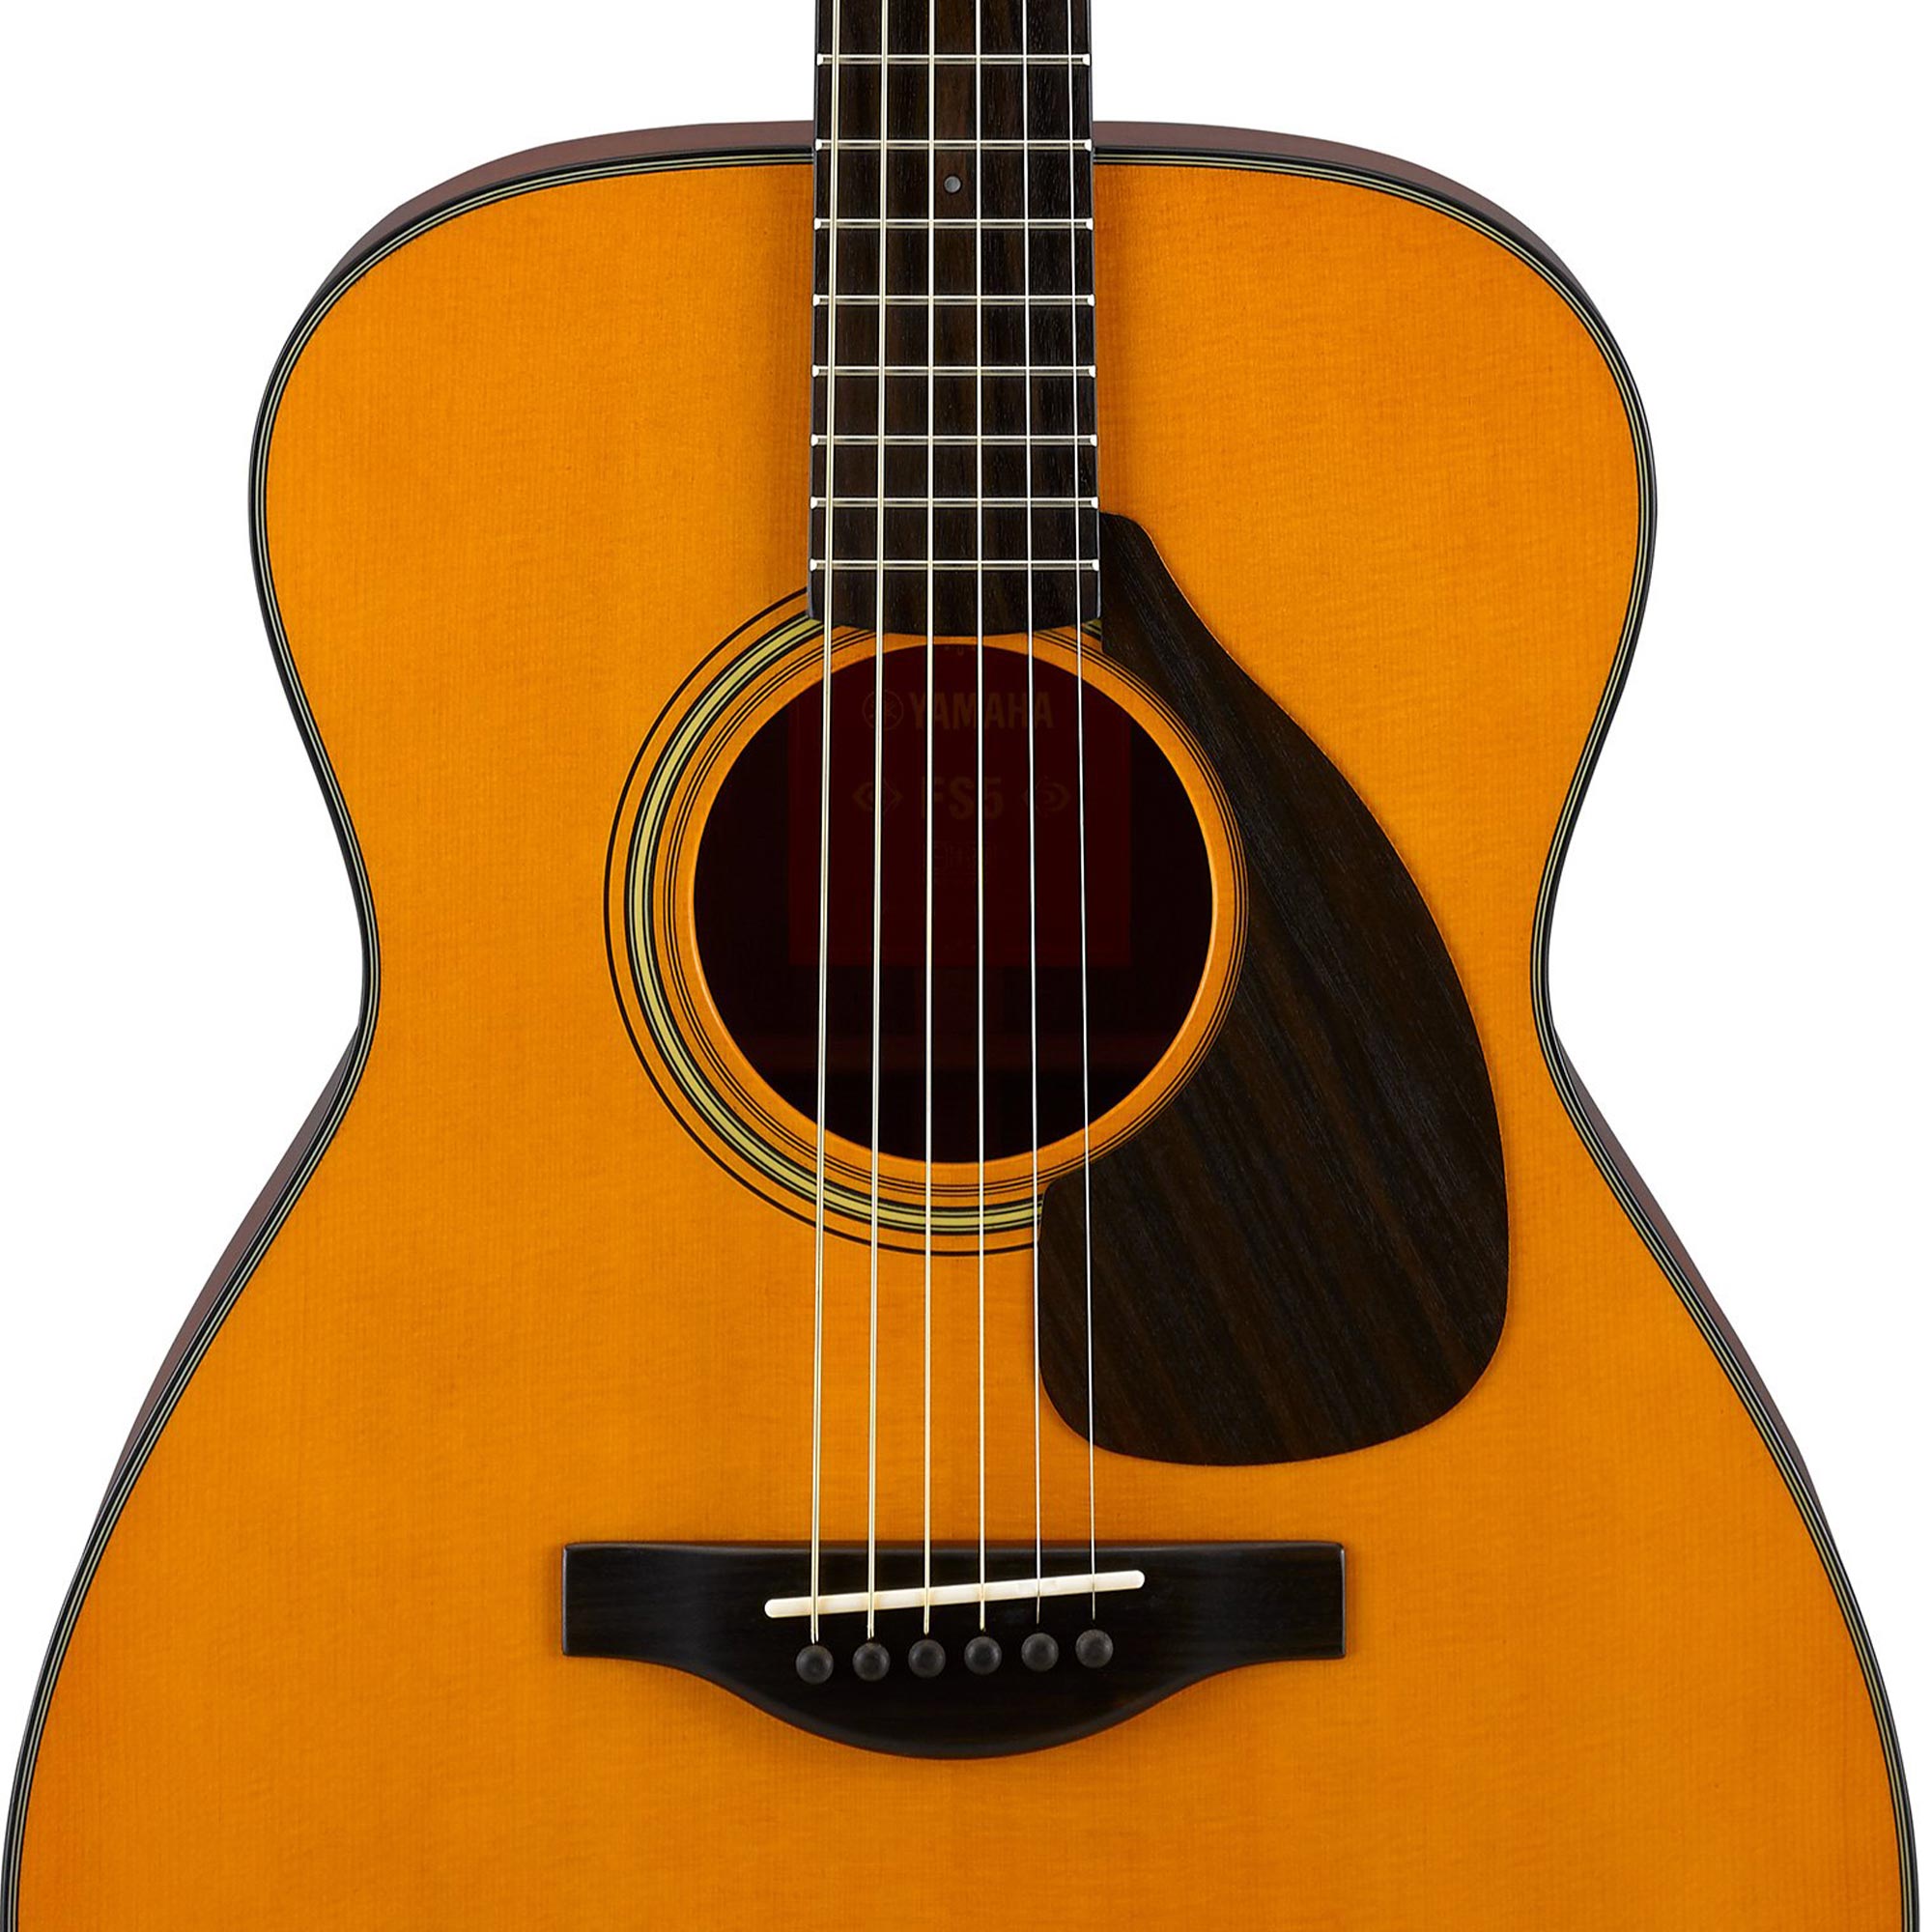 Yamaha Red Label FS5 Concert Acoustic Guitar Natural | The Music